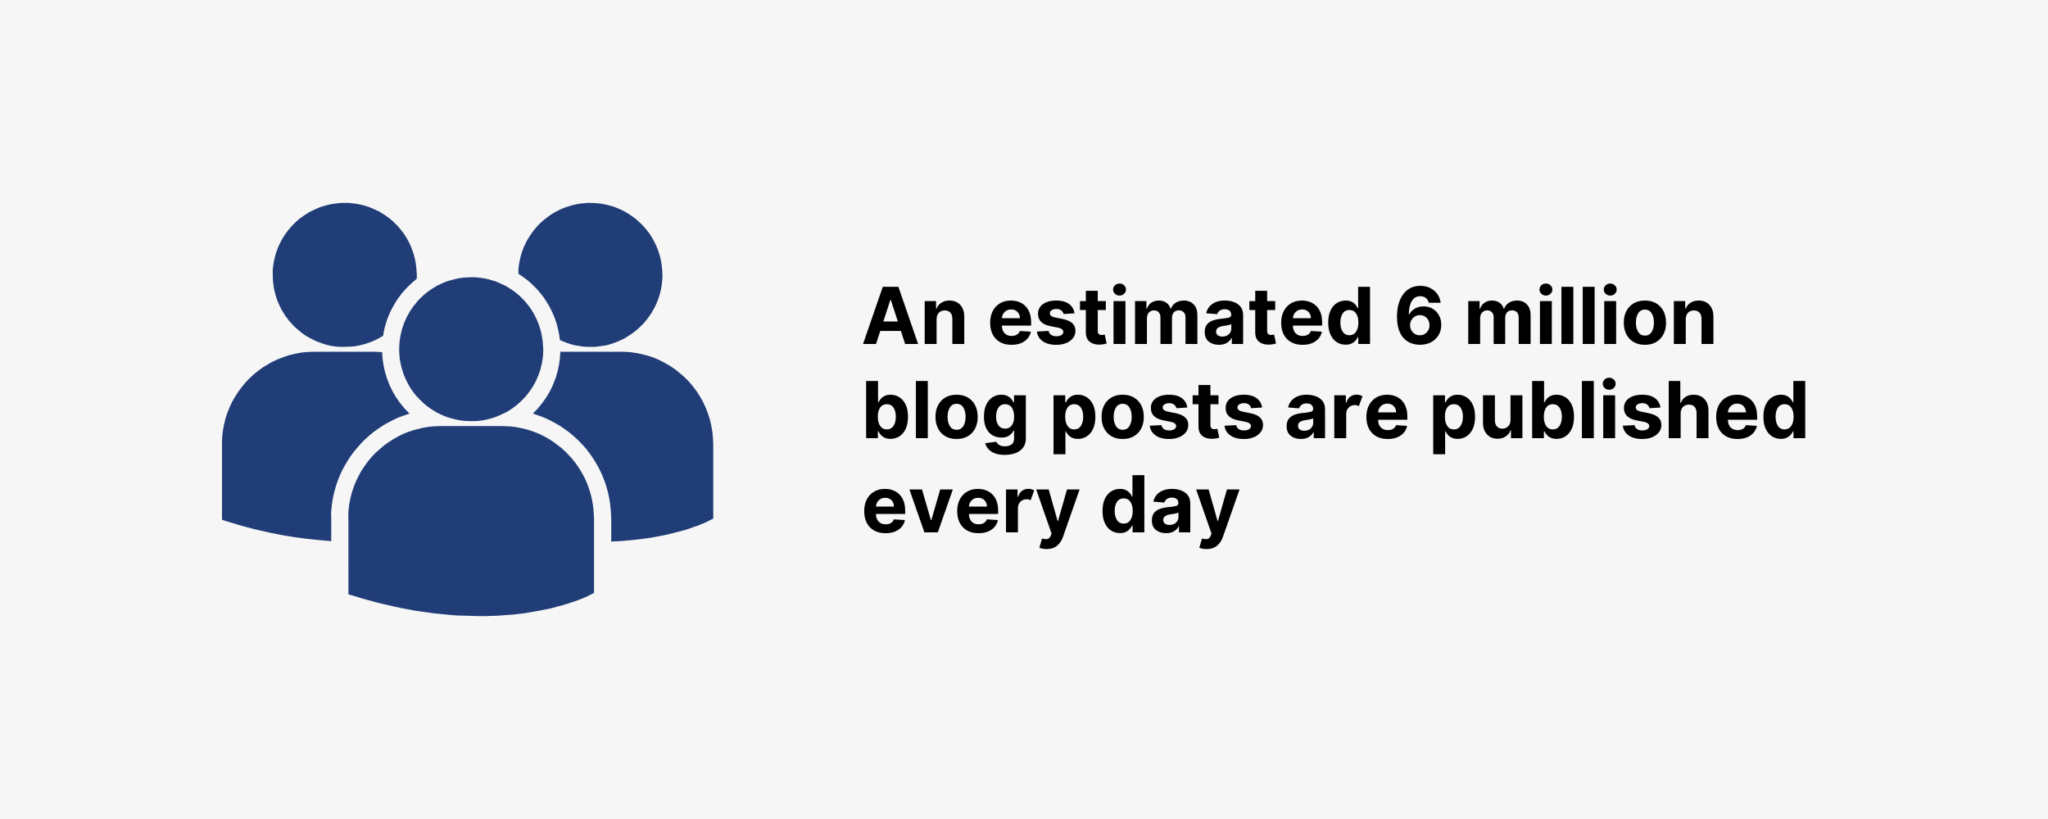 blog-posts-published-every-day